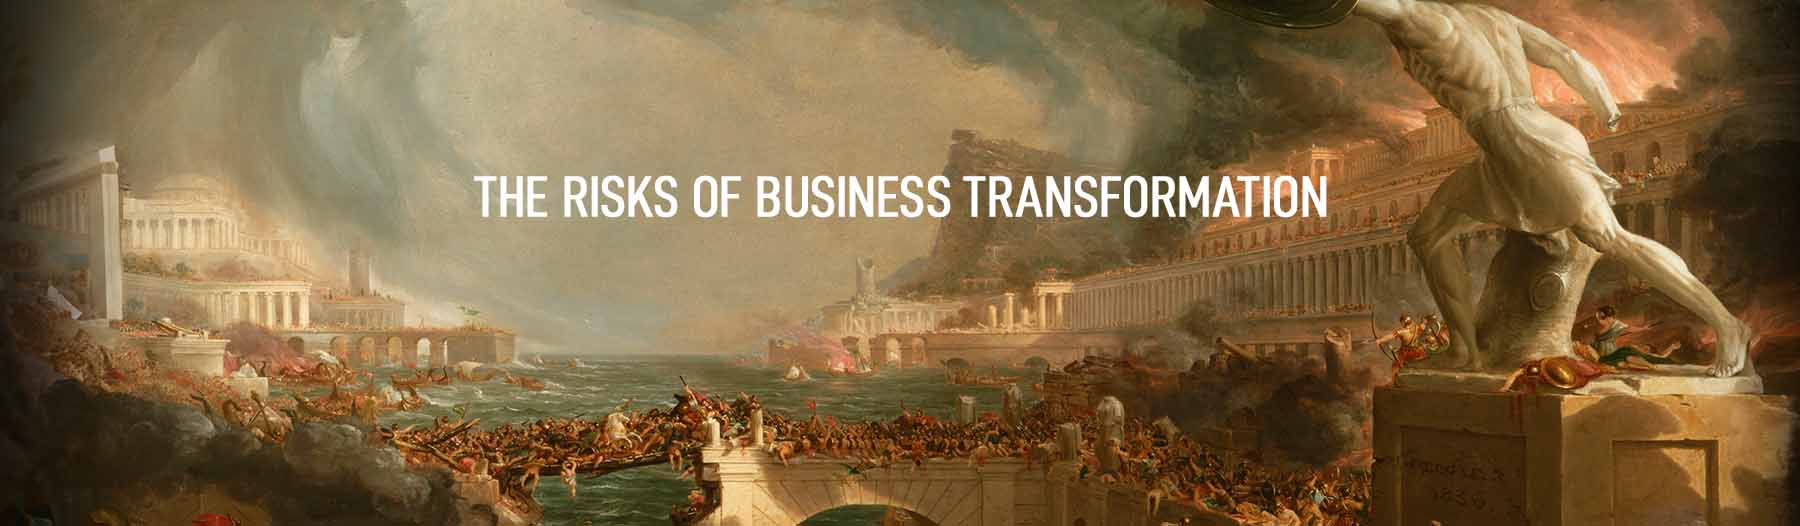 The Risks of Business Transformation